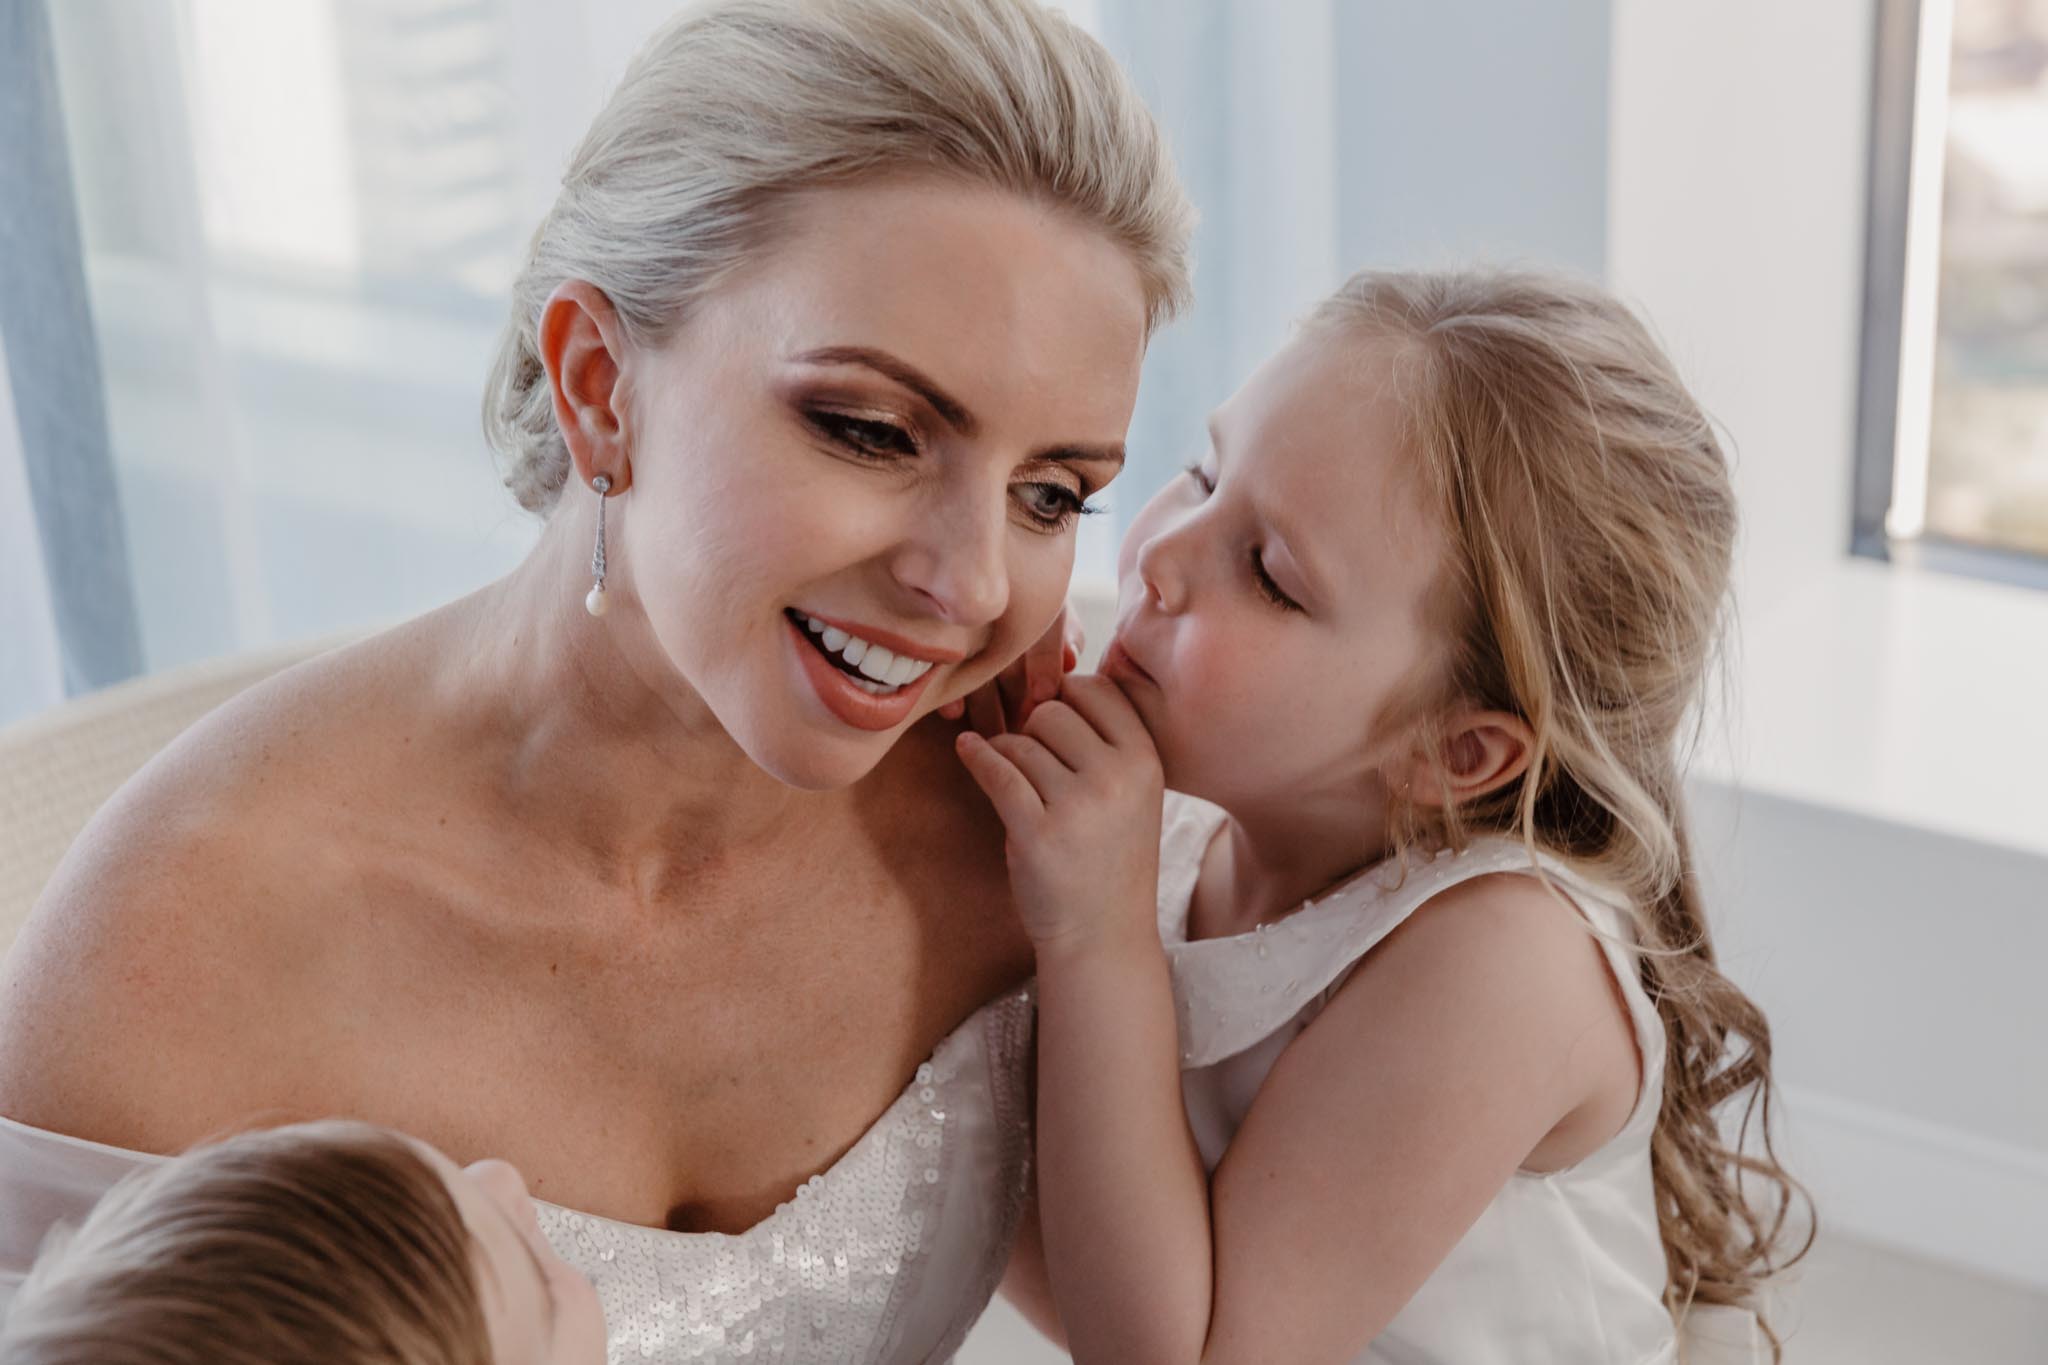 Preparing-to-walk-down-the-aisle-on-her-wedding-day-this-stunning-bride-is-given-last-minute-kisses-and-cuddles-from-her-beautiful-children-gold-coast-family-documentary-wedding-photography